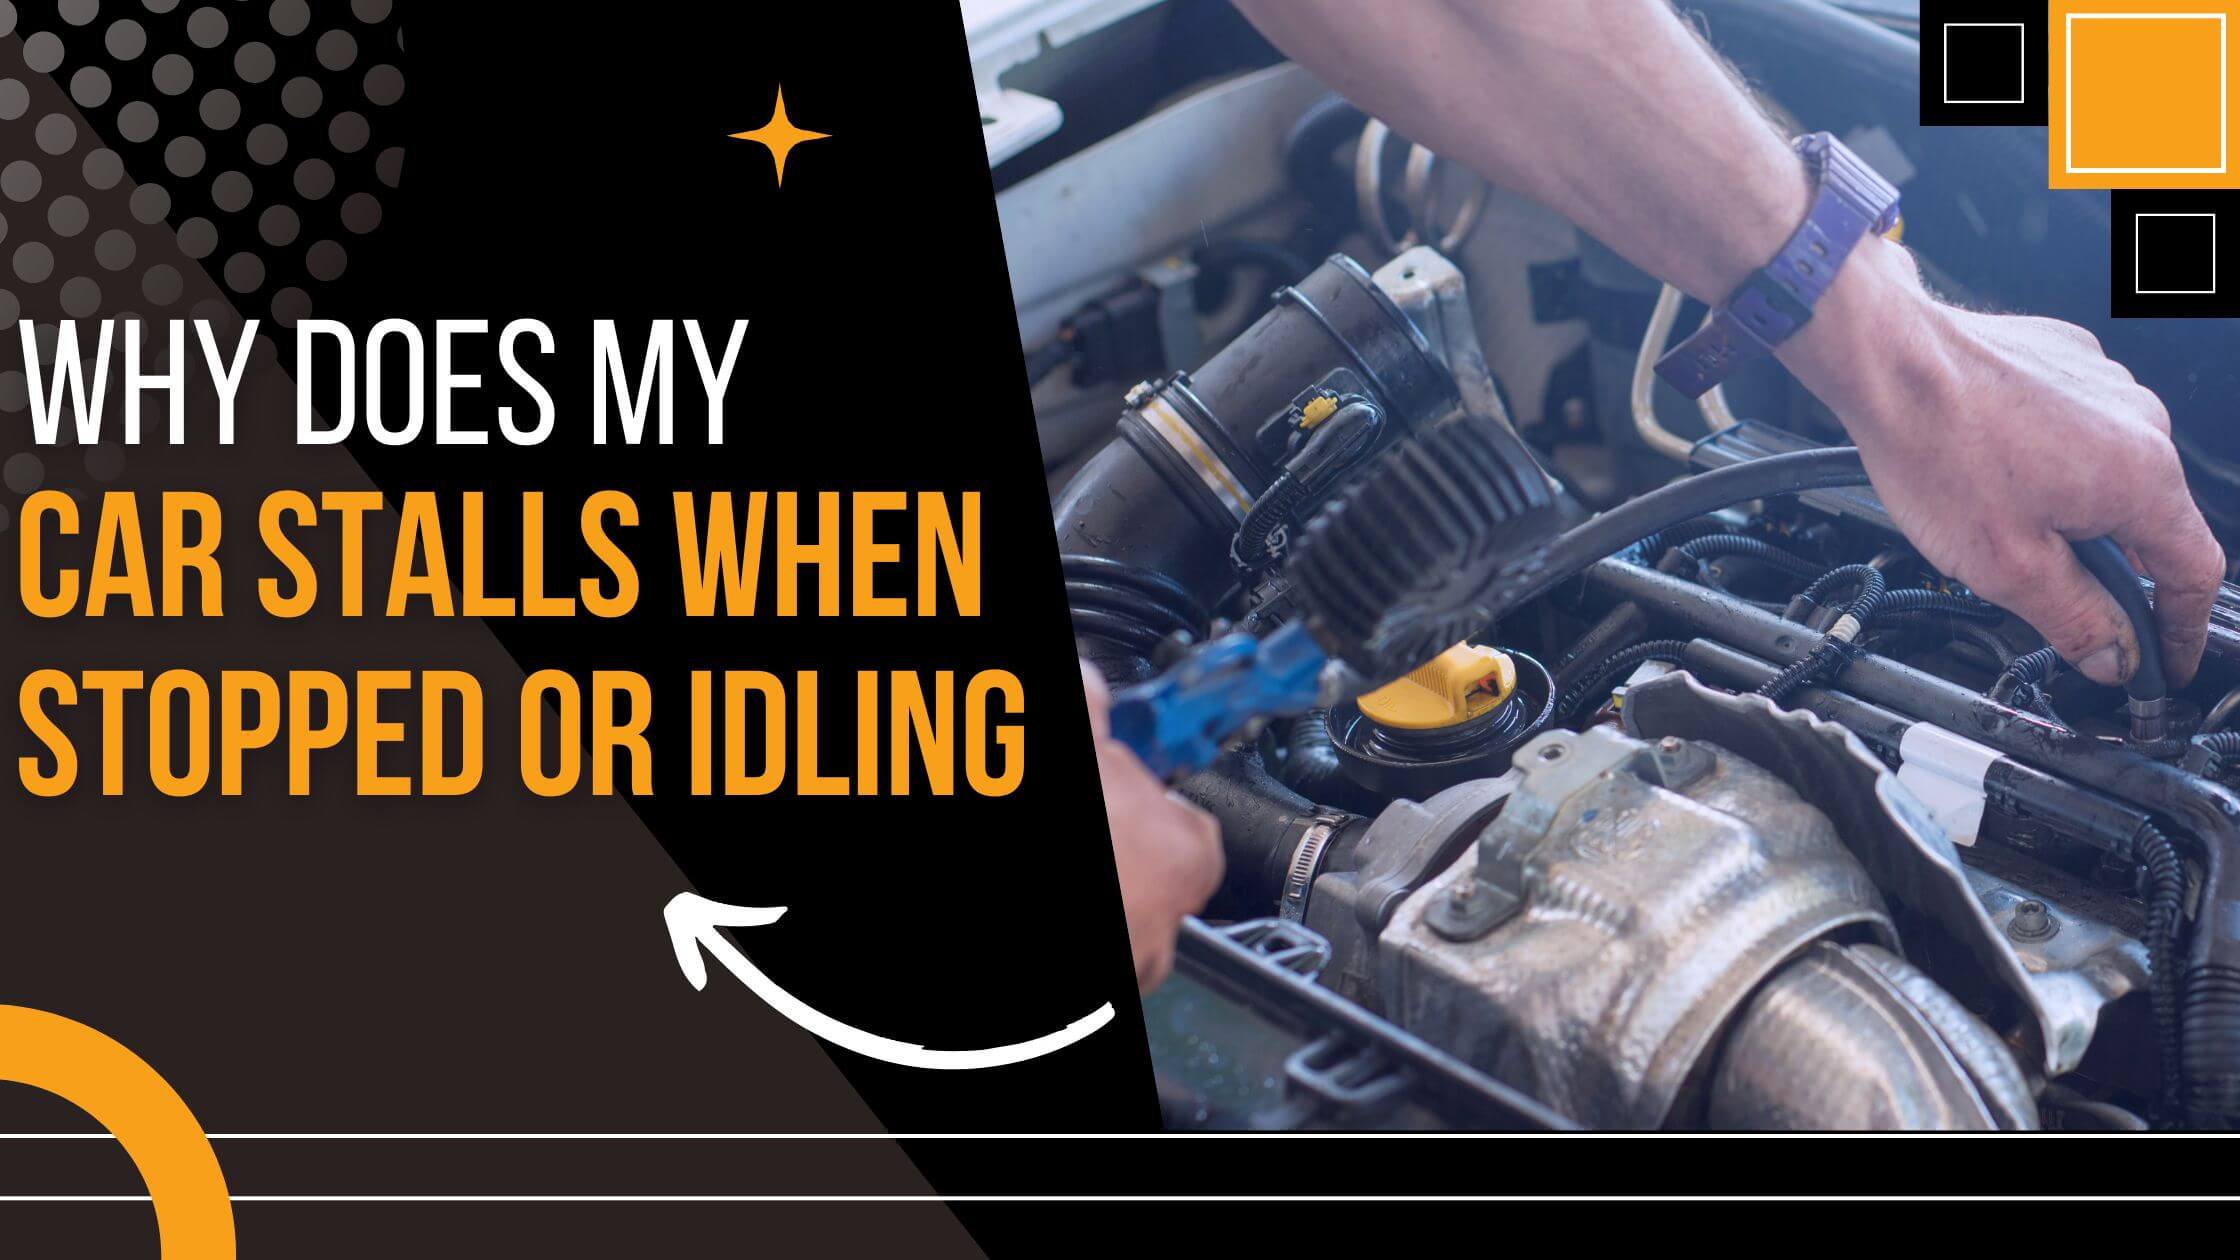 Why Does My Car Stalls When Idling Or Stopped- Things You Should Do